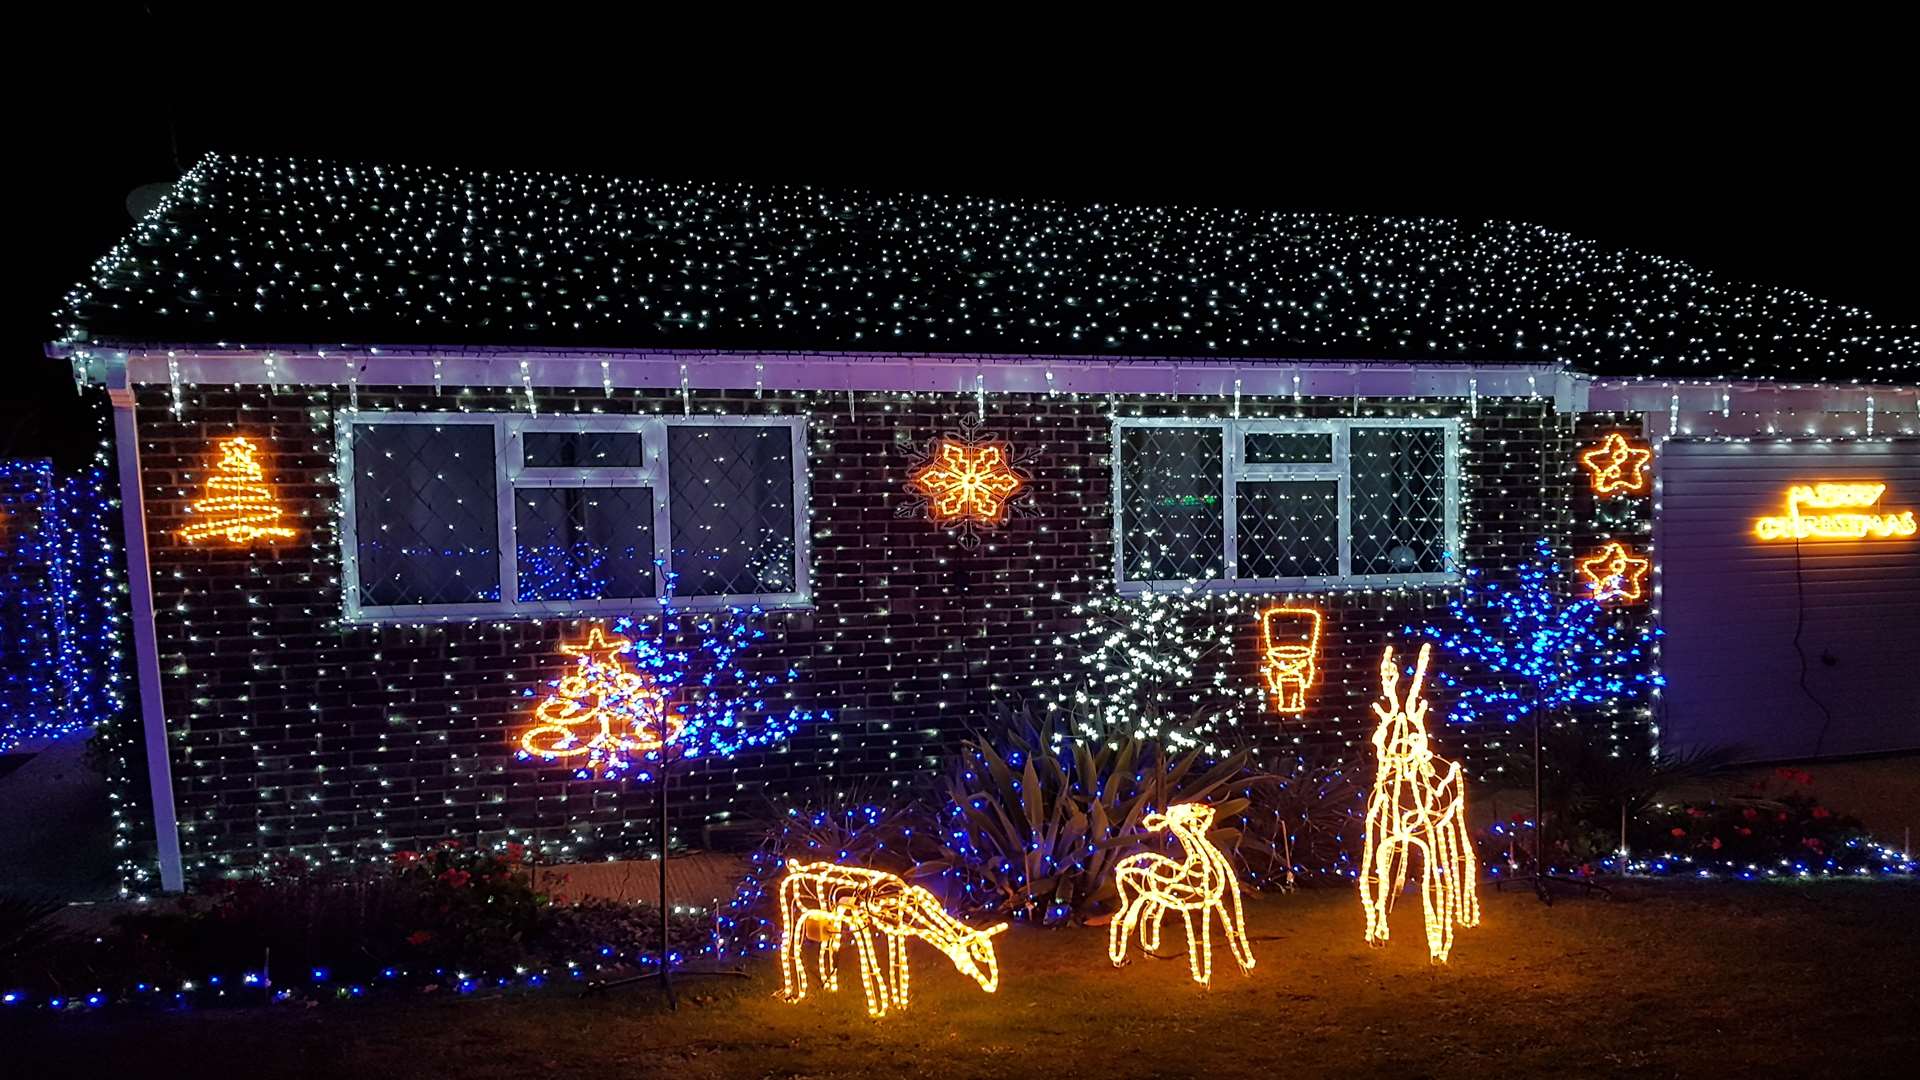 Illuminated reindeer grace the front lawn